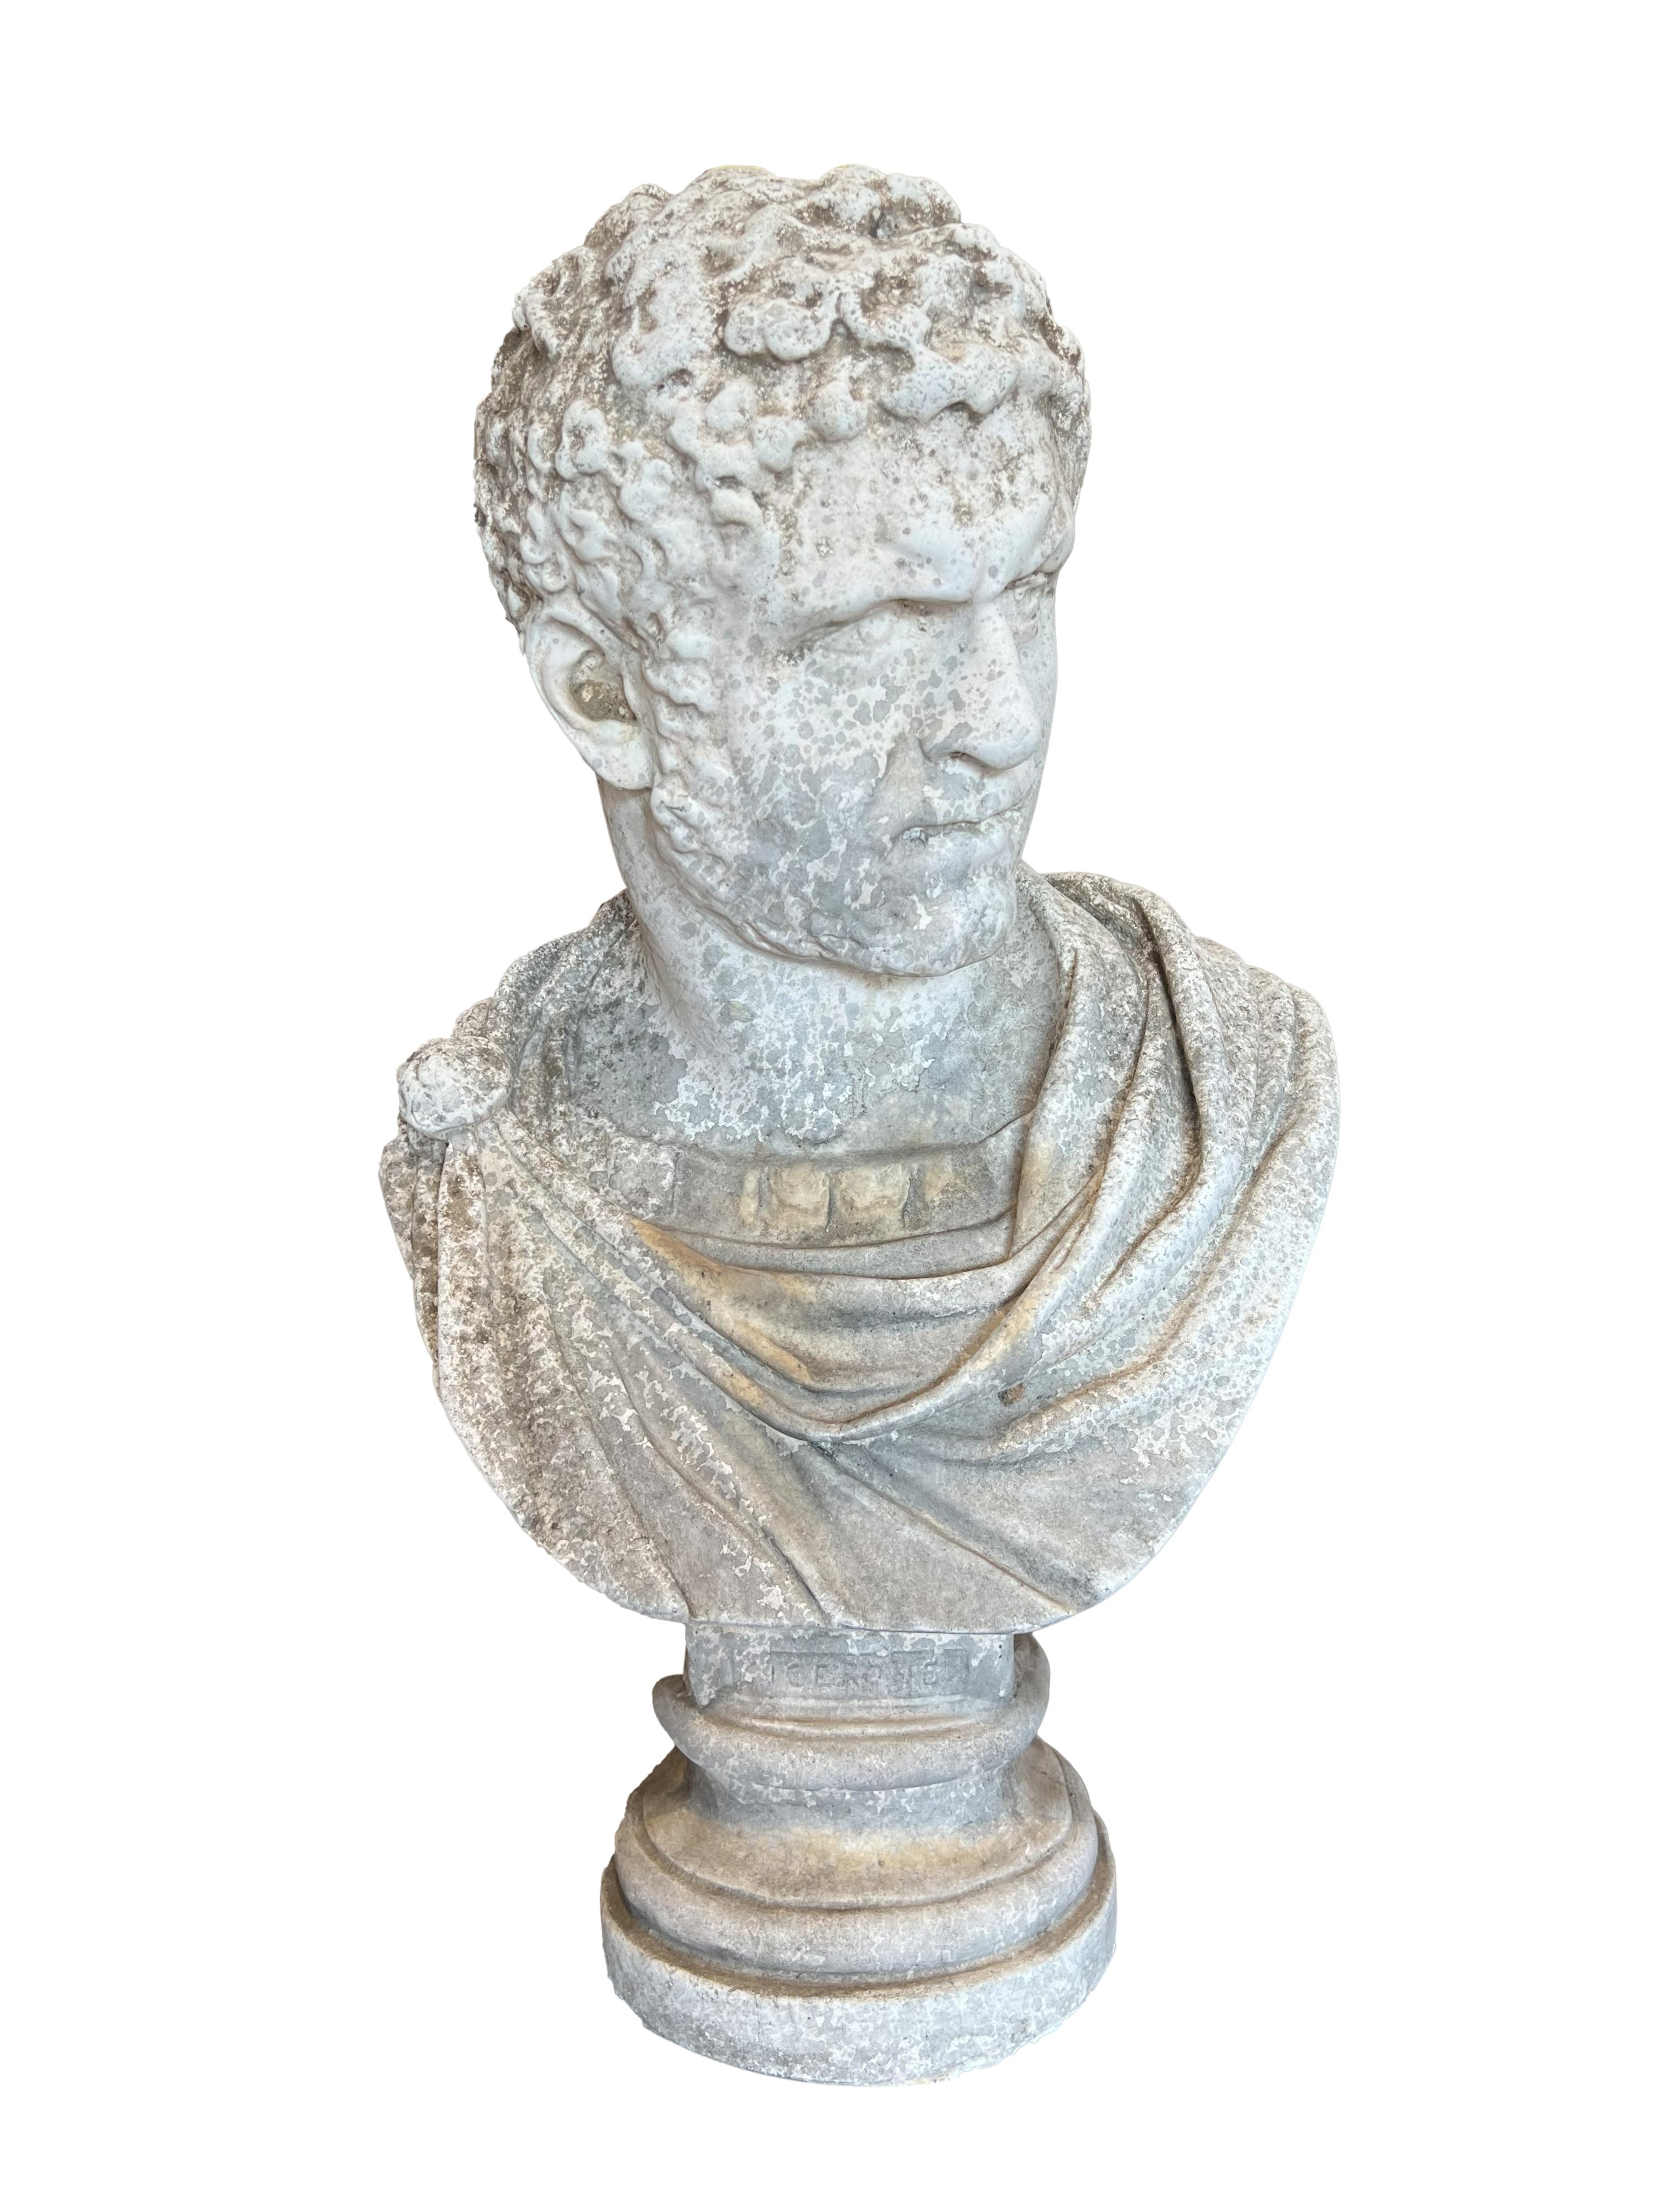 Late 19th century carved stone bust of Marcus Aurelius Antoninus (born Lucius Septimius Bassianus, 4 April 188 – 8 April 217), better known by his nickname Caracalla was Roman emperor from 198 to 217 AD. He was a member of the Severan dynasty, the